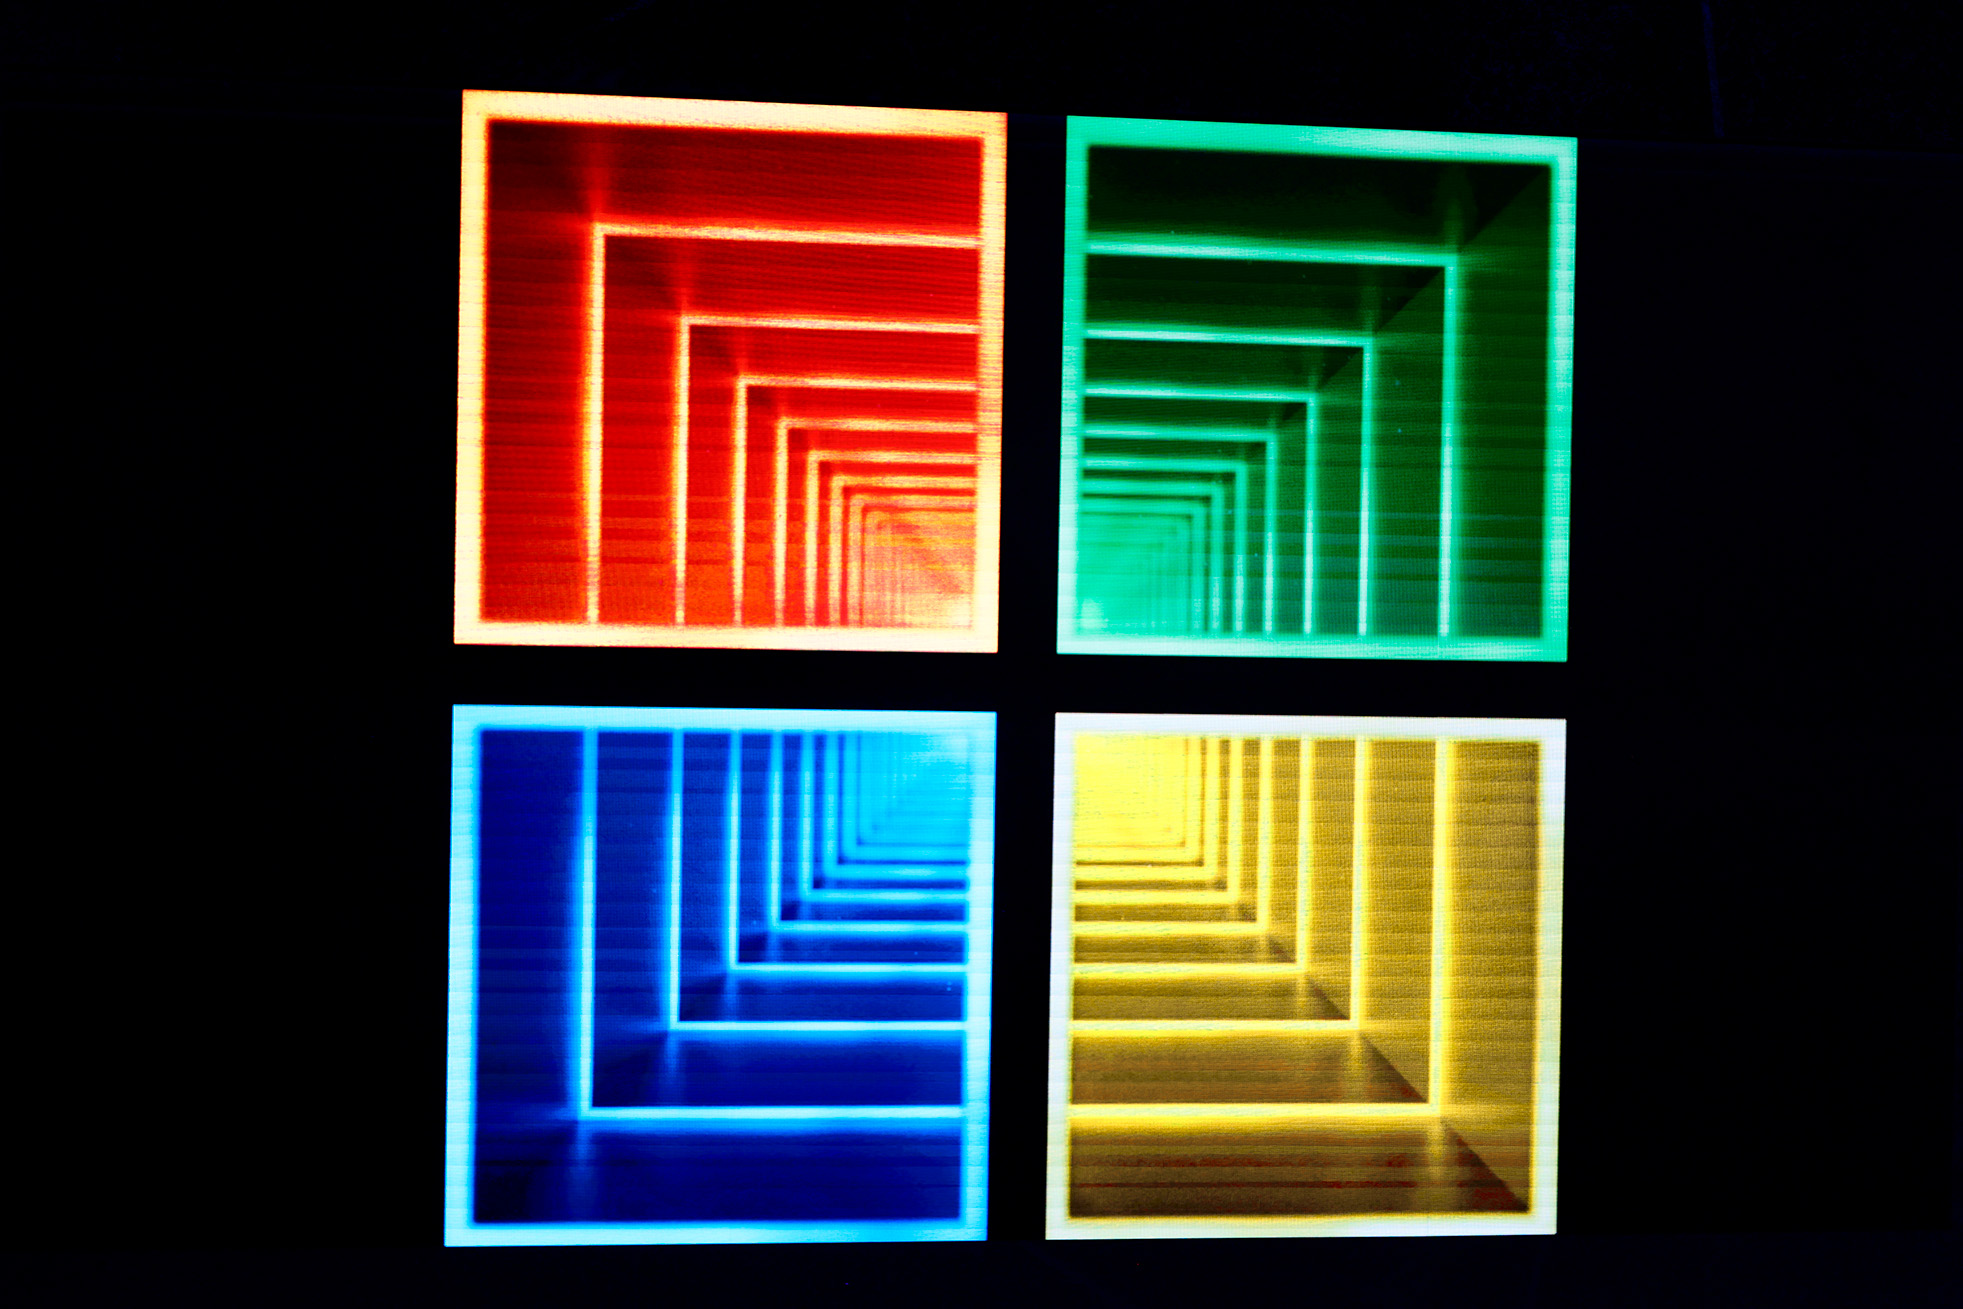 A digital representation of the Microsoft logo, containing endless boxes of color within each of the four colored sqaures that make up the logo against a dark background, to form a 'tunnel' effect